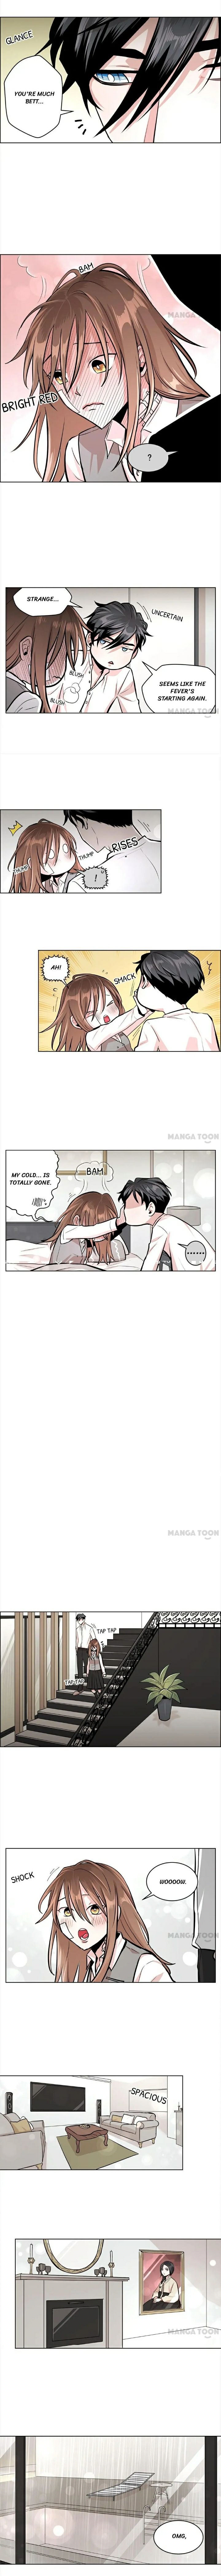 Blood Type Love Chapter 10 page 3